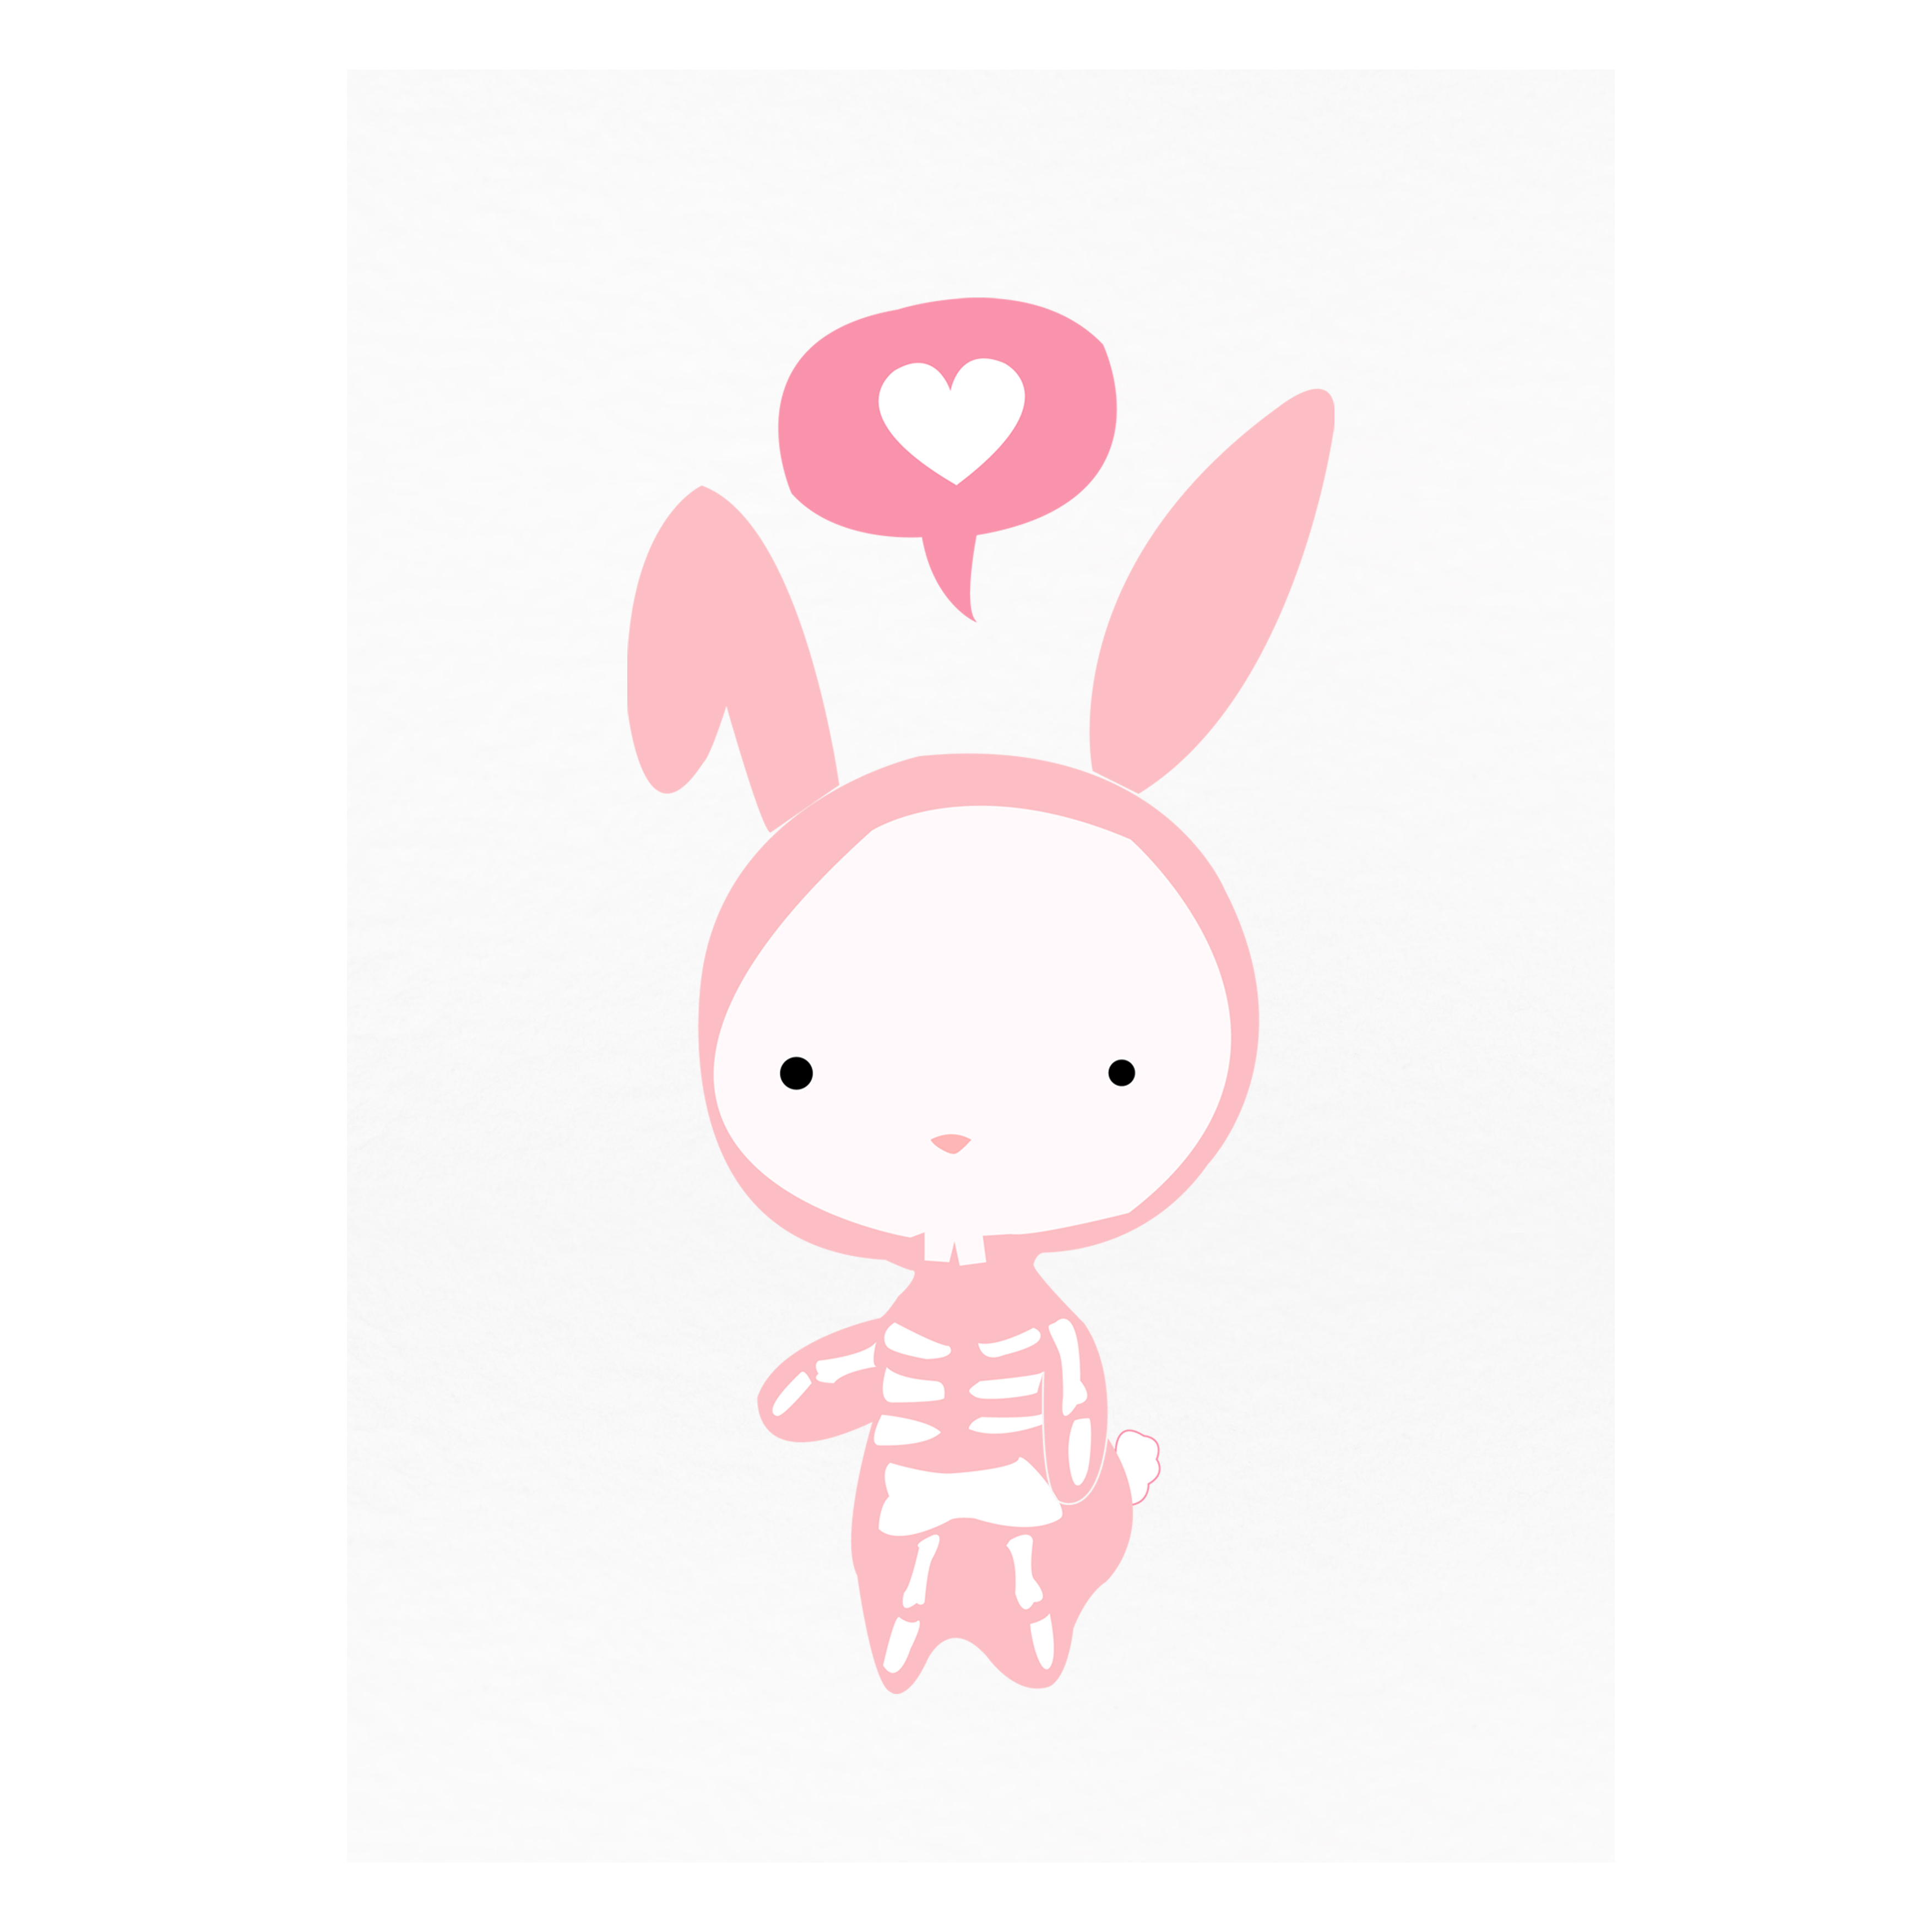 www.dontmesswiththerabbit.fr - Don't ever mess with a cute rabbit - Art Print